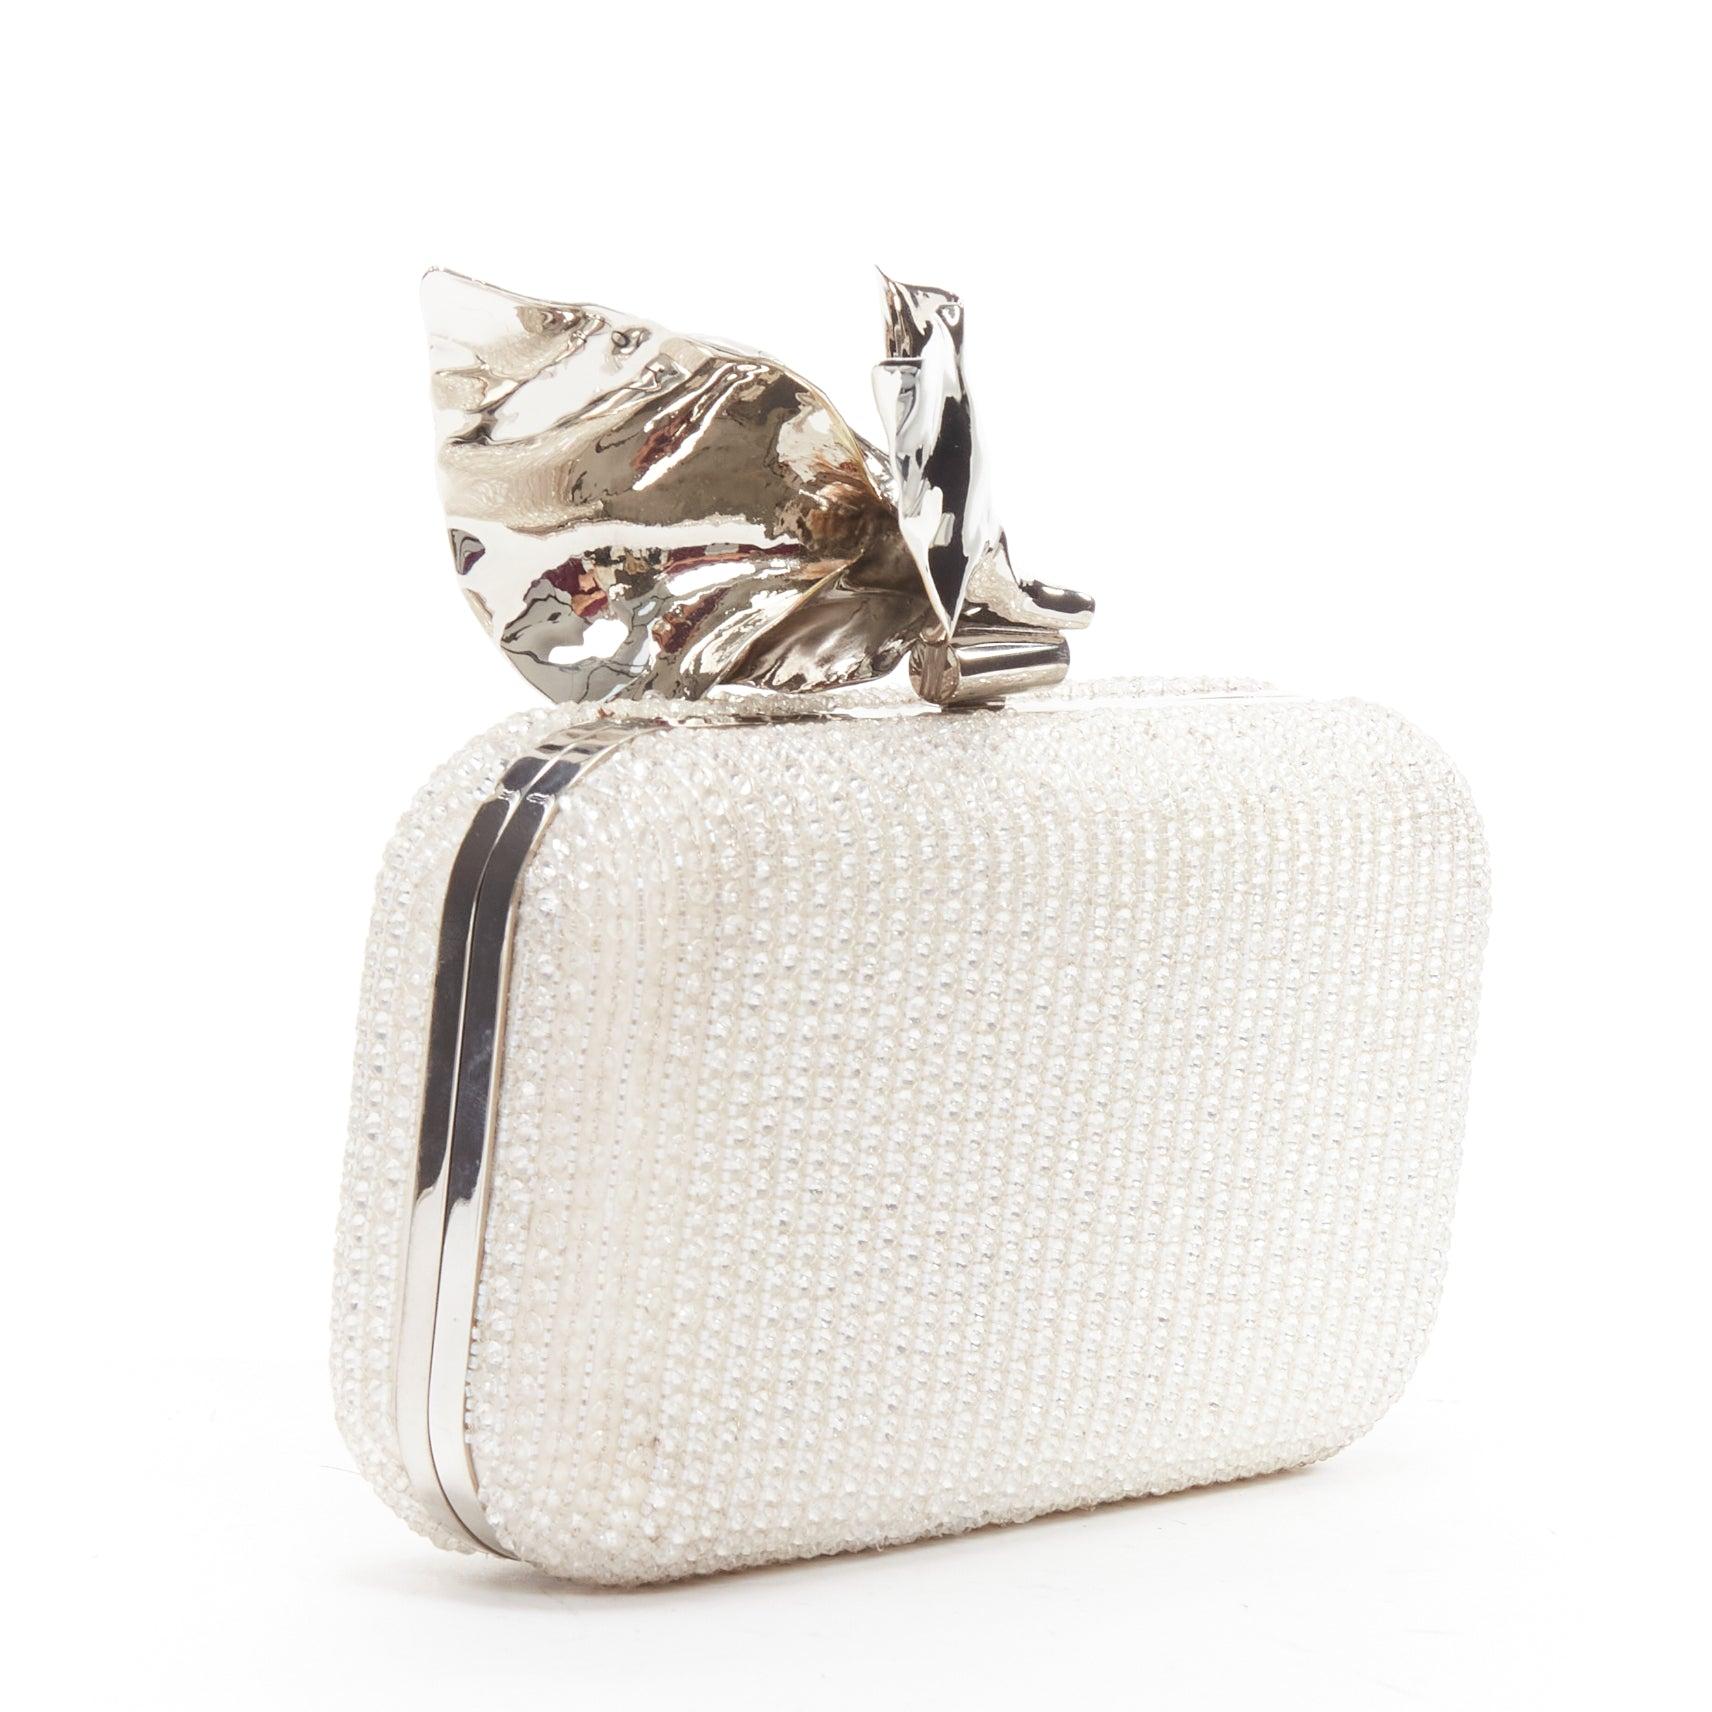 MATICEVSKI Romancing white bead diamante silver metal flower clasp box clutch bag
Reference: KEDG/A00257
Brand: Maticevski
Model: Romancing Clutch
Material: Silk
Color: White, Silver
Pattern: Solid
Closure: Clasp
Lining: White Leather
Made in: